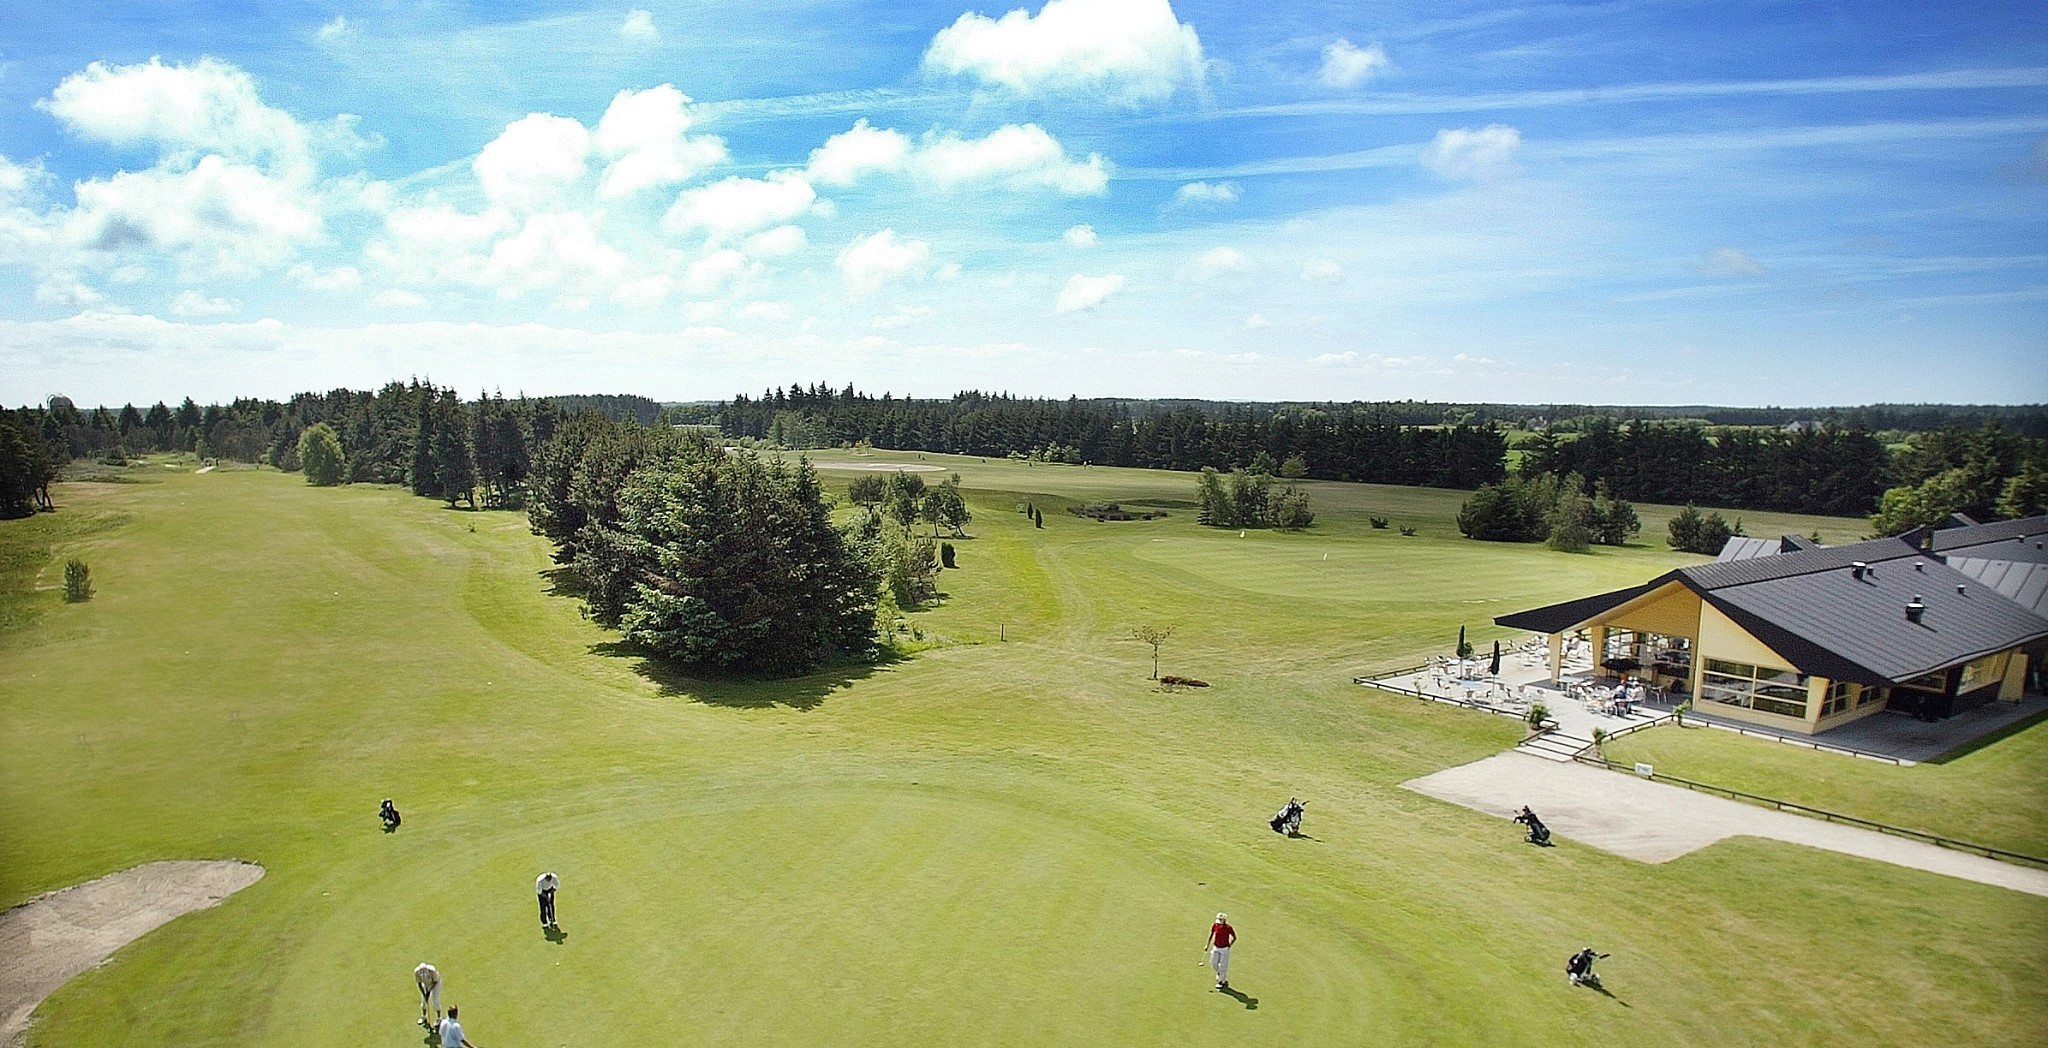 Blokhus Golf Center – European Golf Golf Tournaments, Golf Courses, Golf Travels and Golf Players in